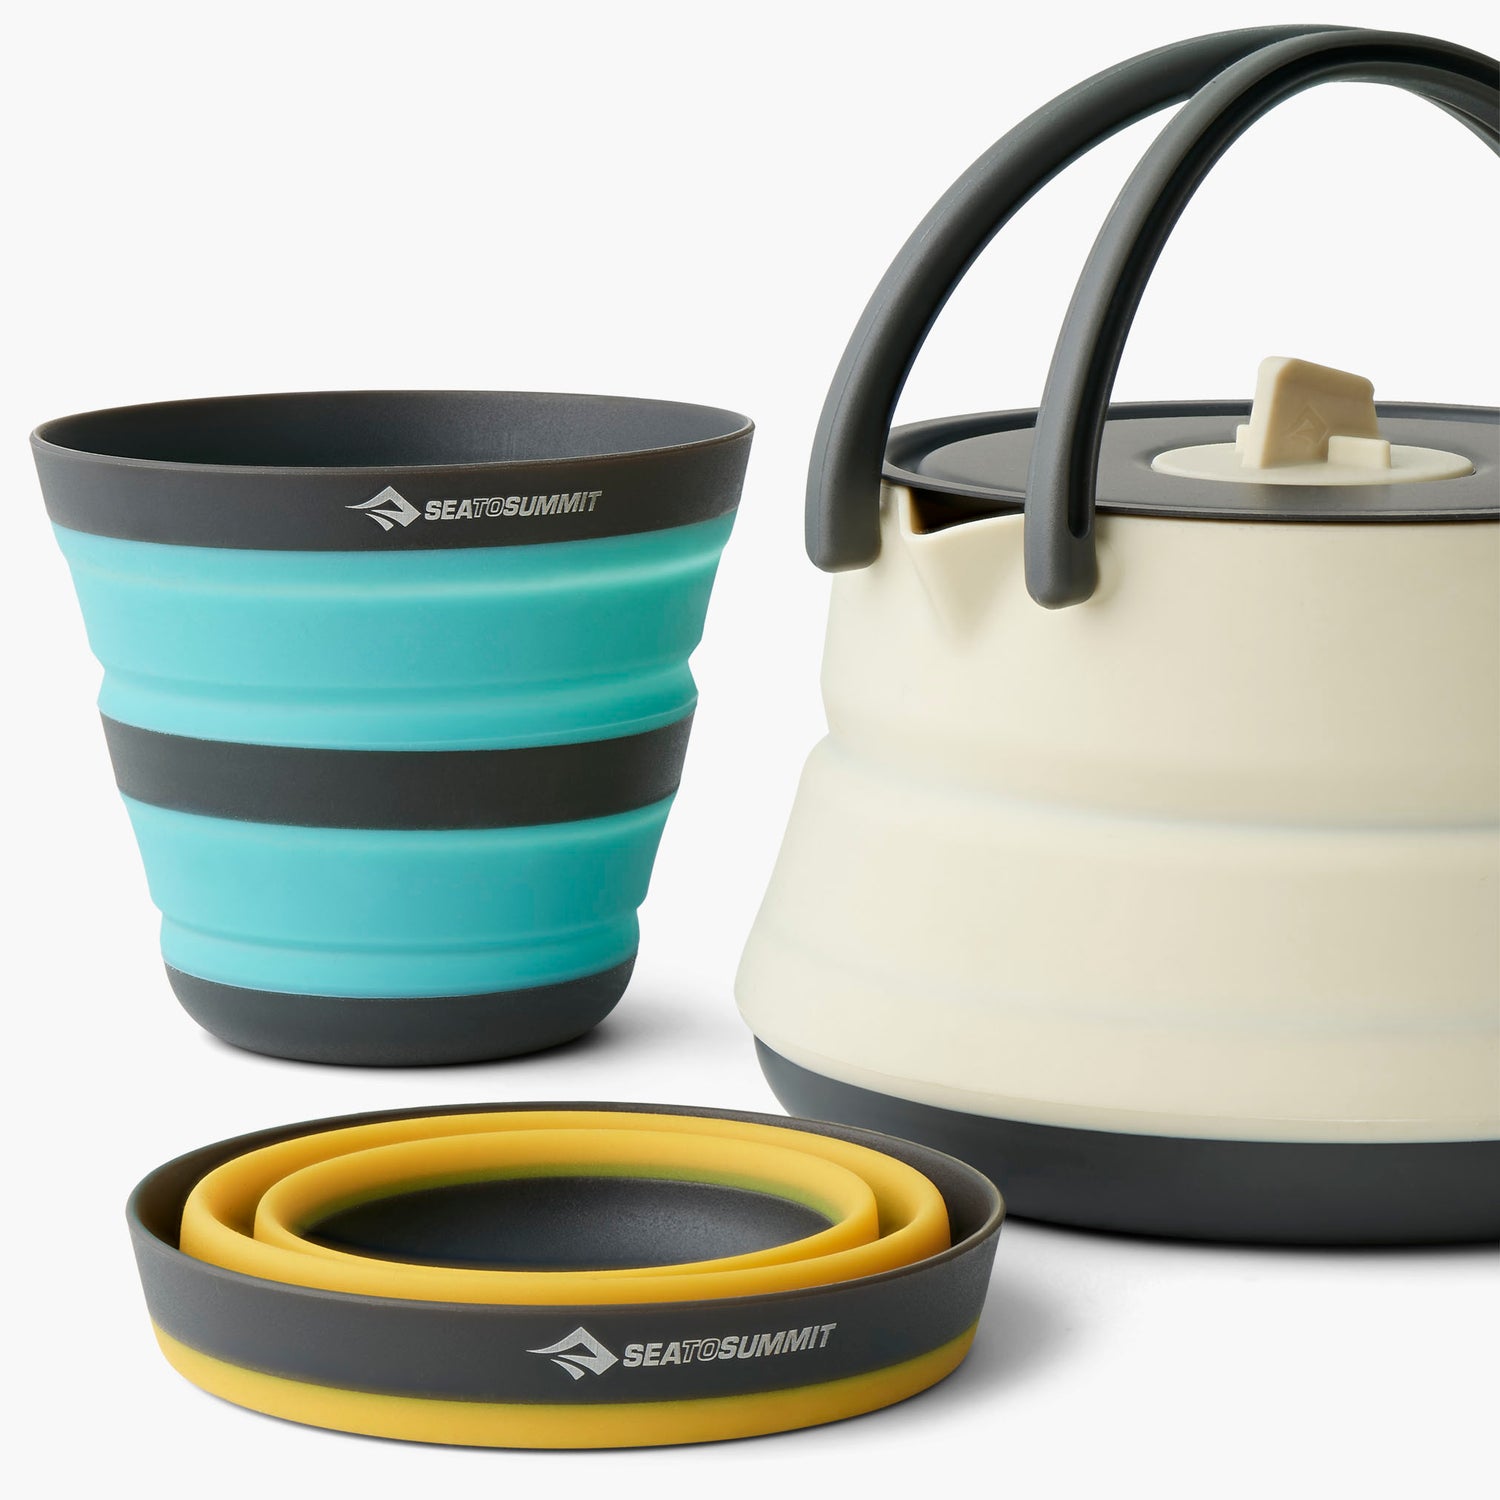 Sea To Summit Frontier UL Collapsible Kettle Cook Set - 2P 3 Piece